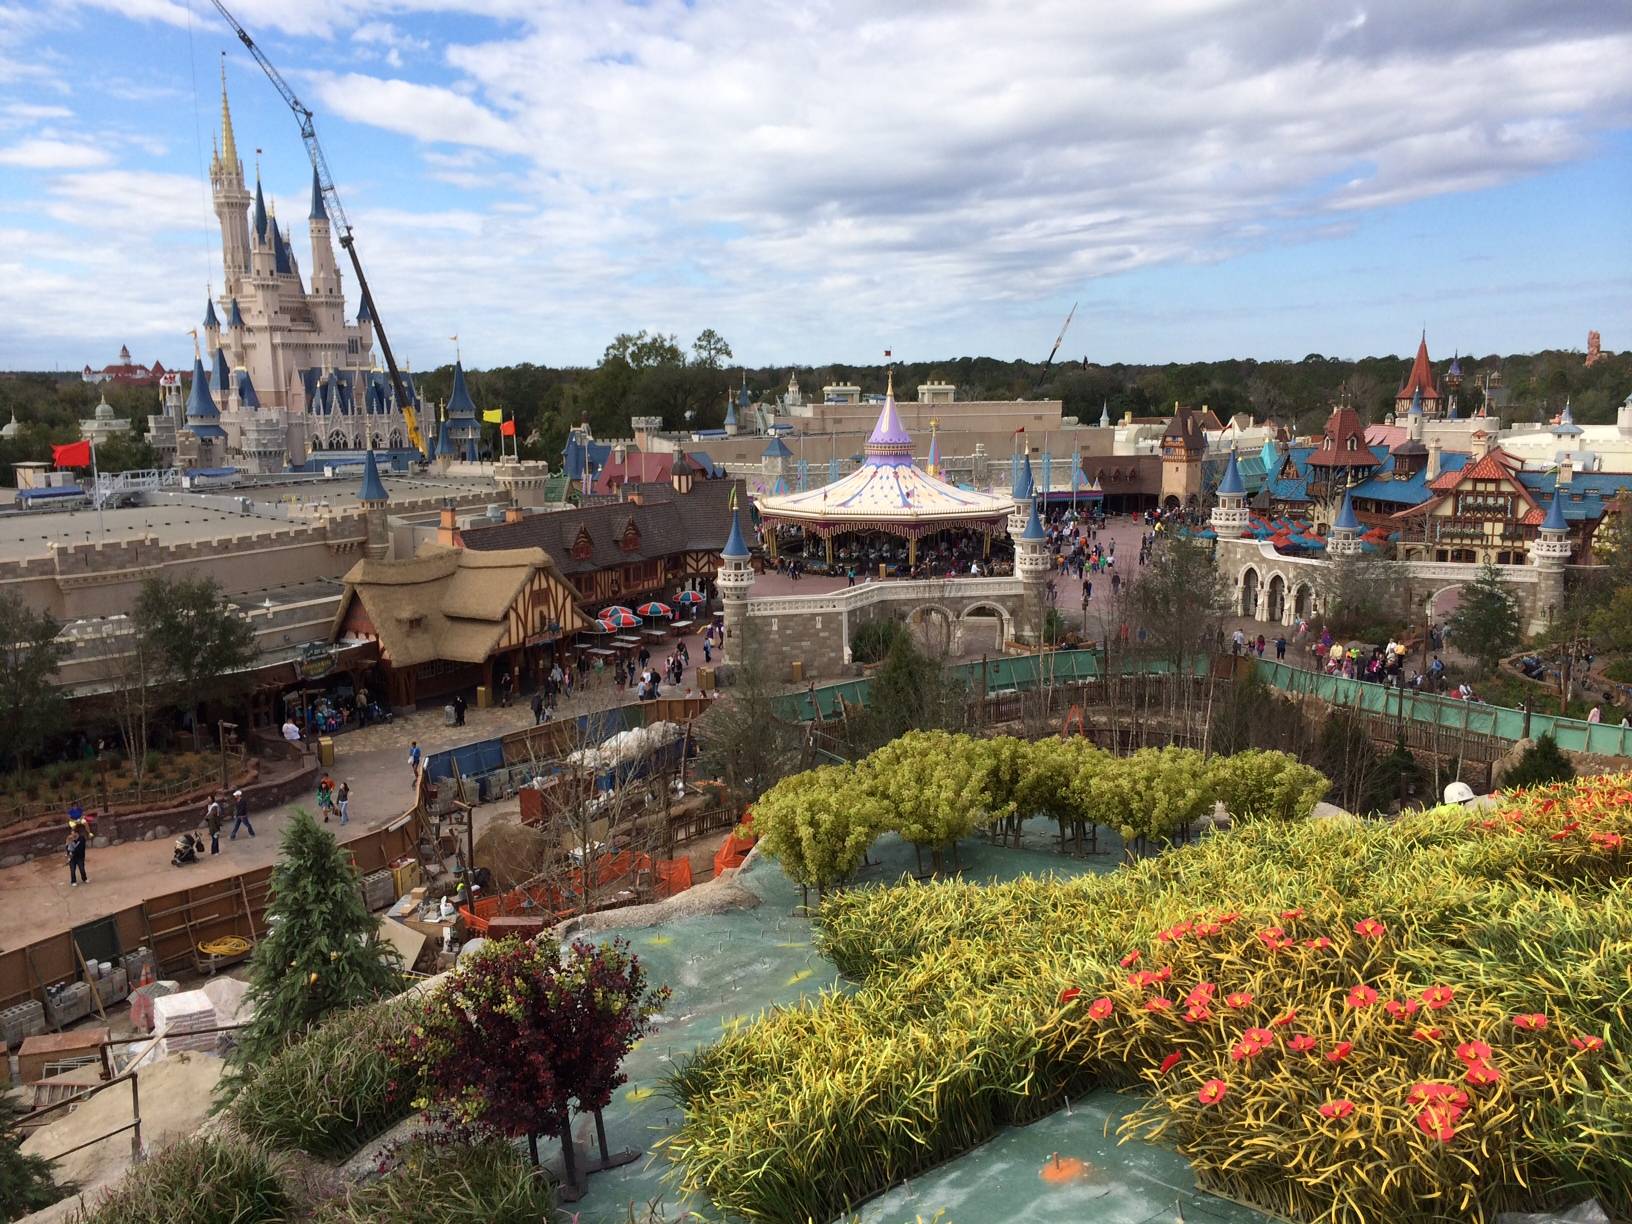 PHOTO - The view from the very top of the Seven Dwarfs Mine Train coaster